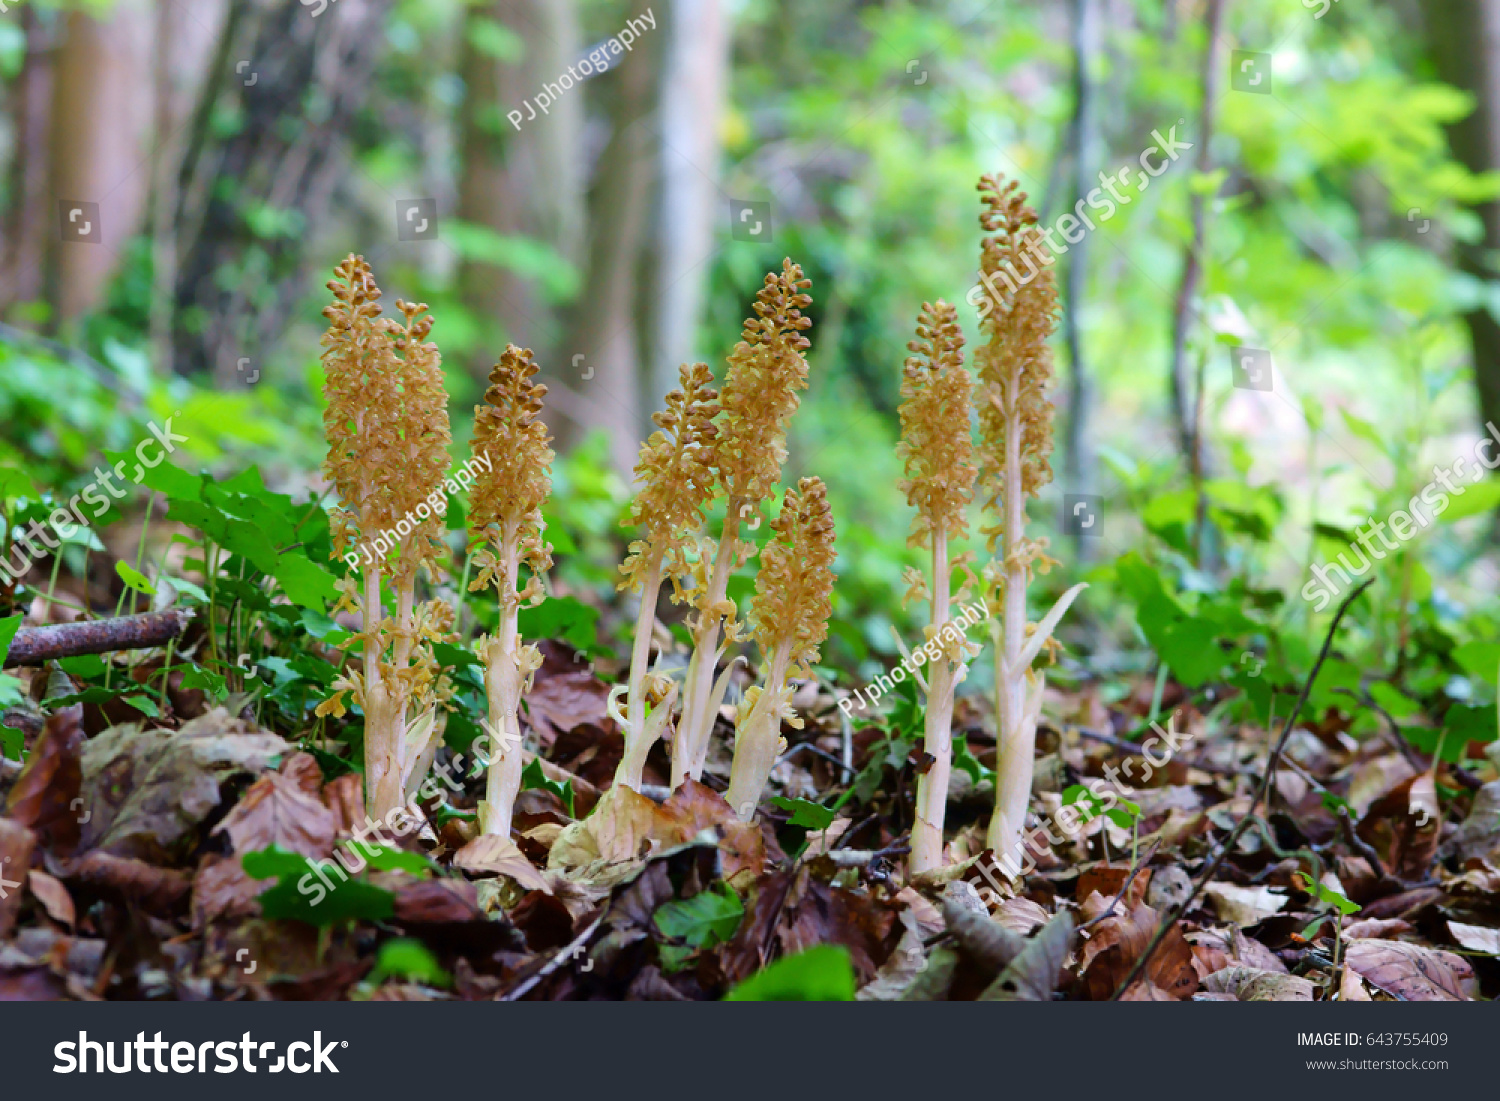 A group of Bird's Nest orchids, Neottia nidus-avis, selective focus, flowering in spring in a typical environment in a Beech Wood, The Plantation, Painswick,The Cotswolds, Gloucestershire, England, UK #643755409